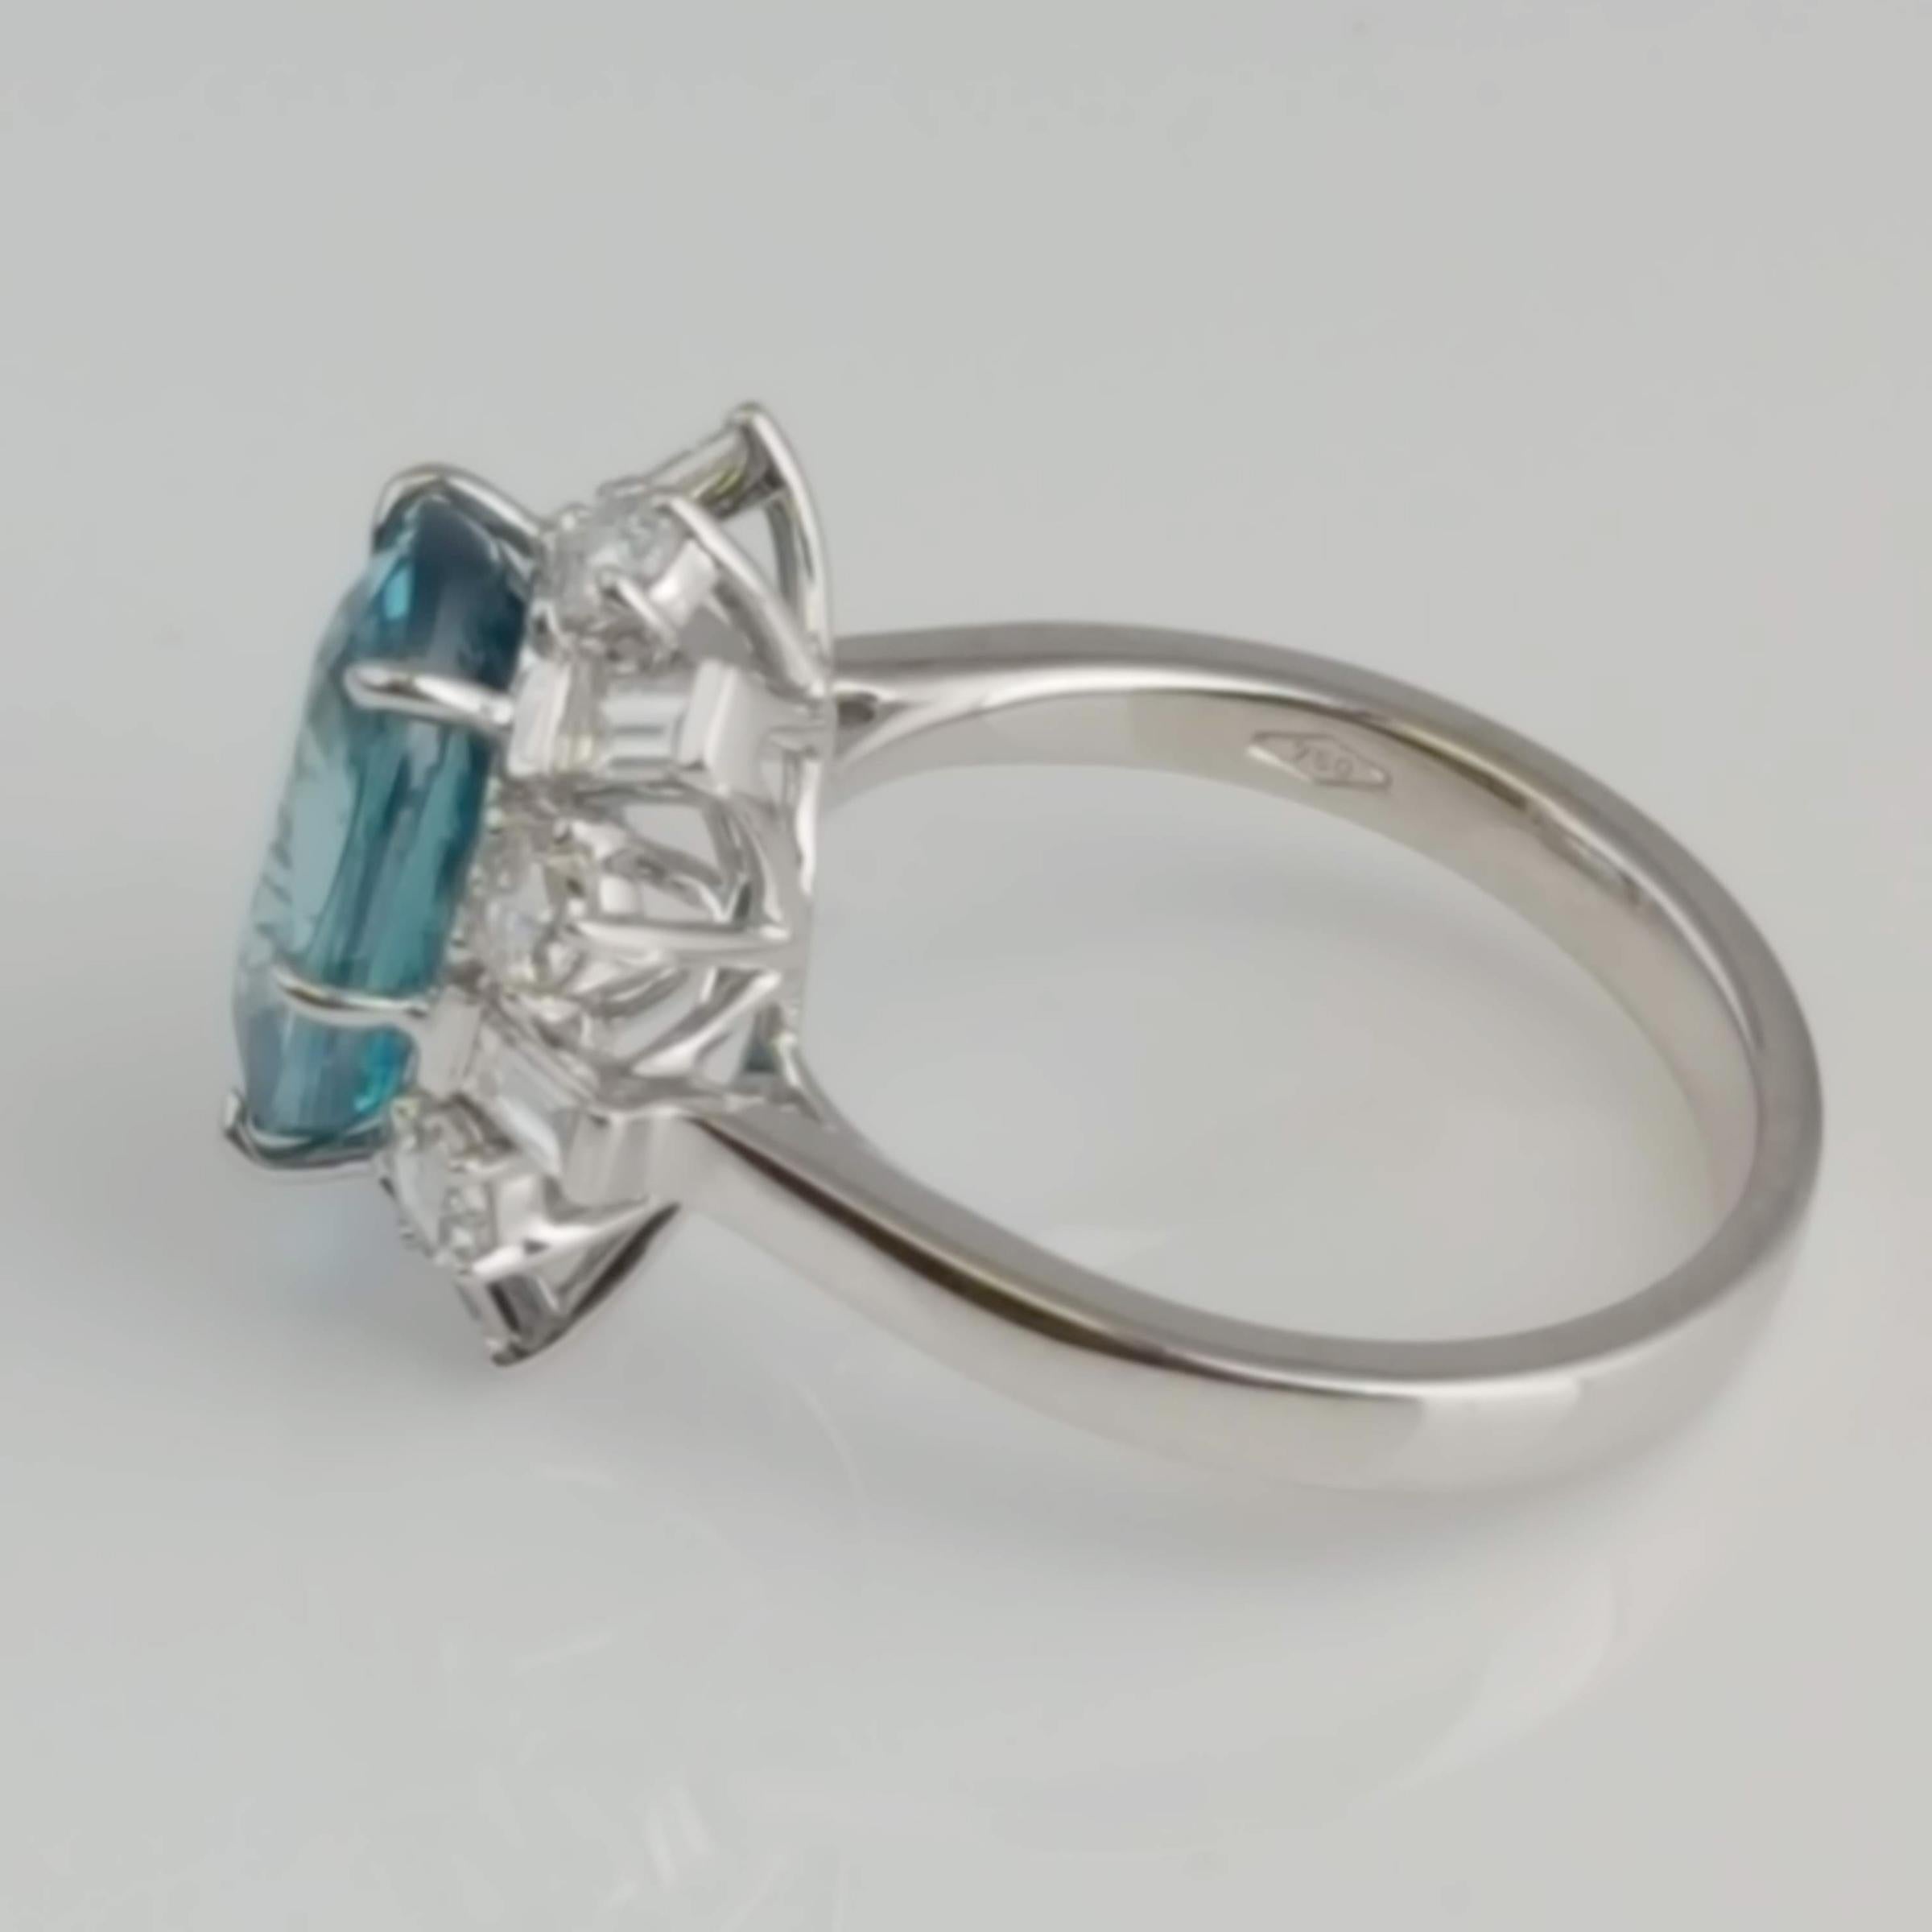 GIA Certified 6.85 Carat Oval Cut Blue Zircon and Diamond Ring in 18W ref1313 In New Condition For Sale In New York, NY